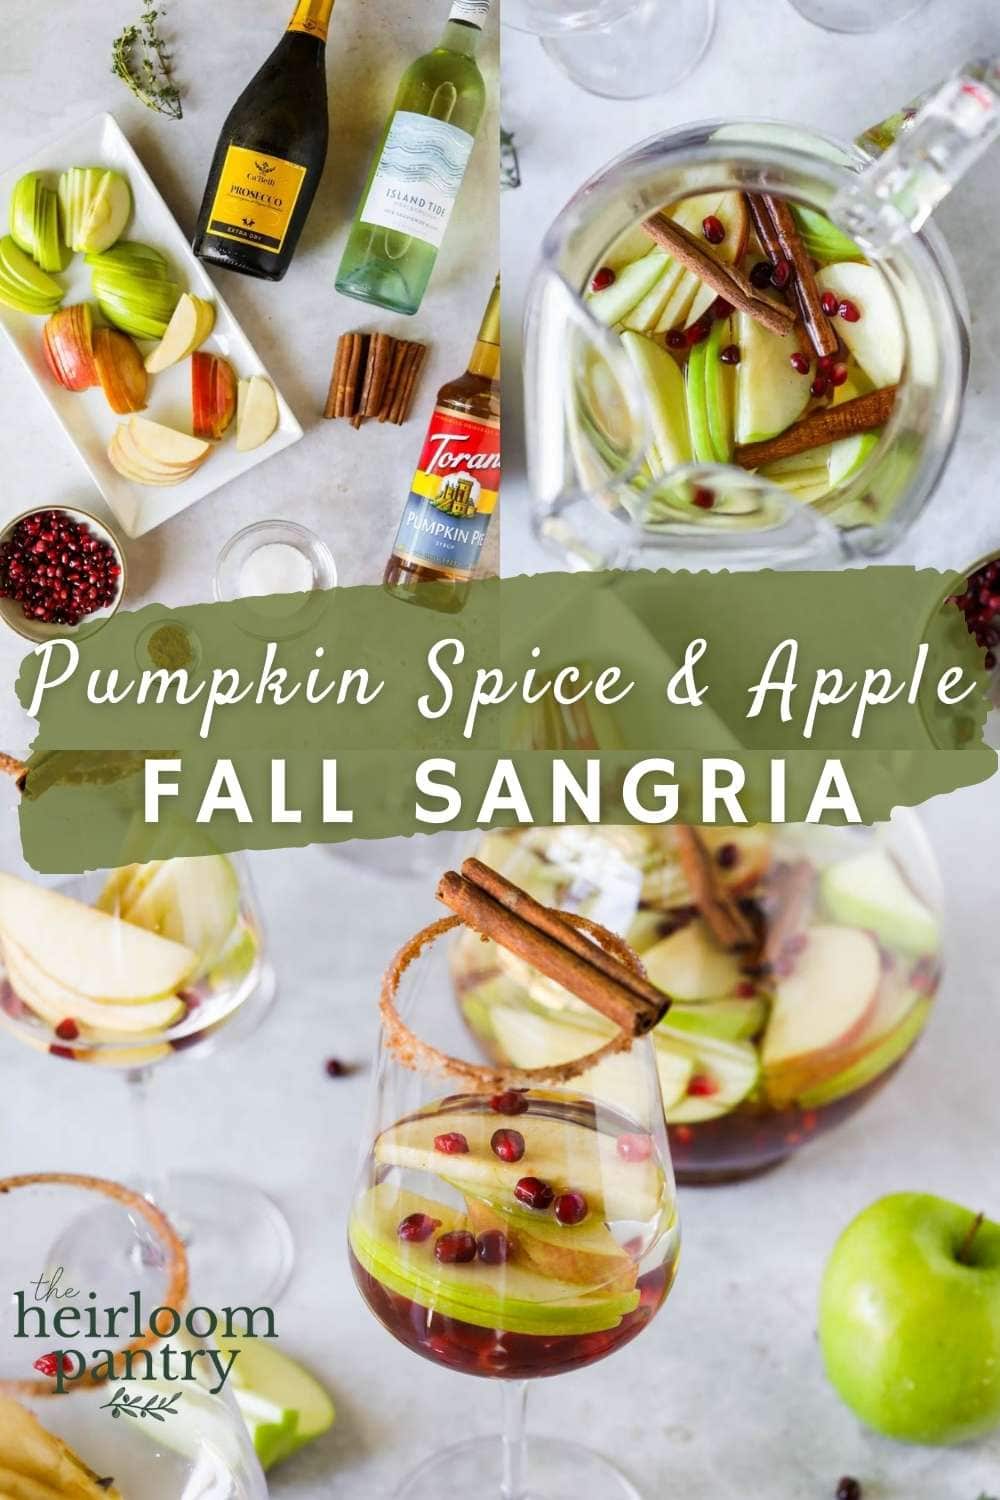 Fall Sangria with Apple and Pumpkin Spice - The Heirloom Pantry Pin